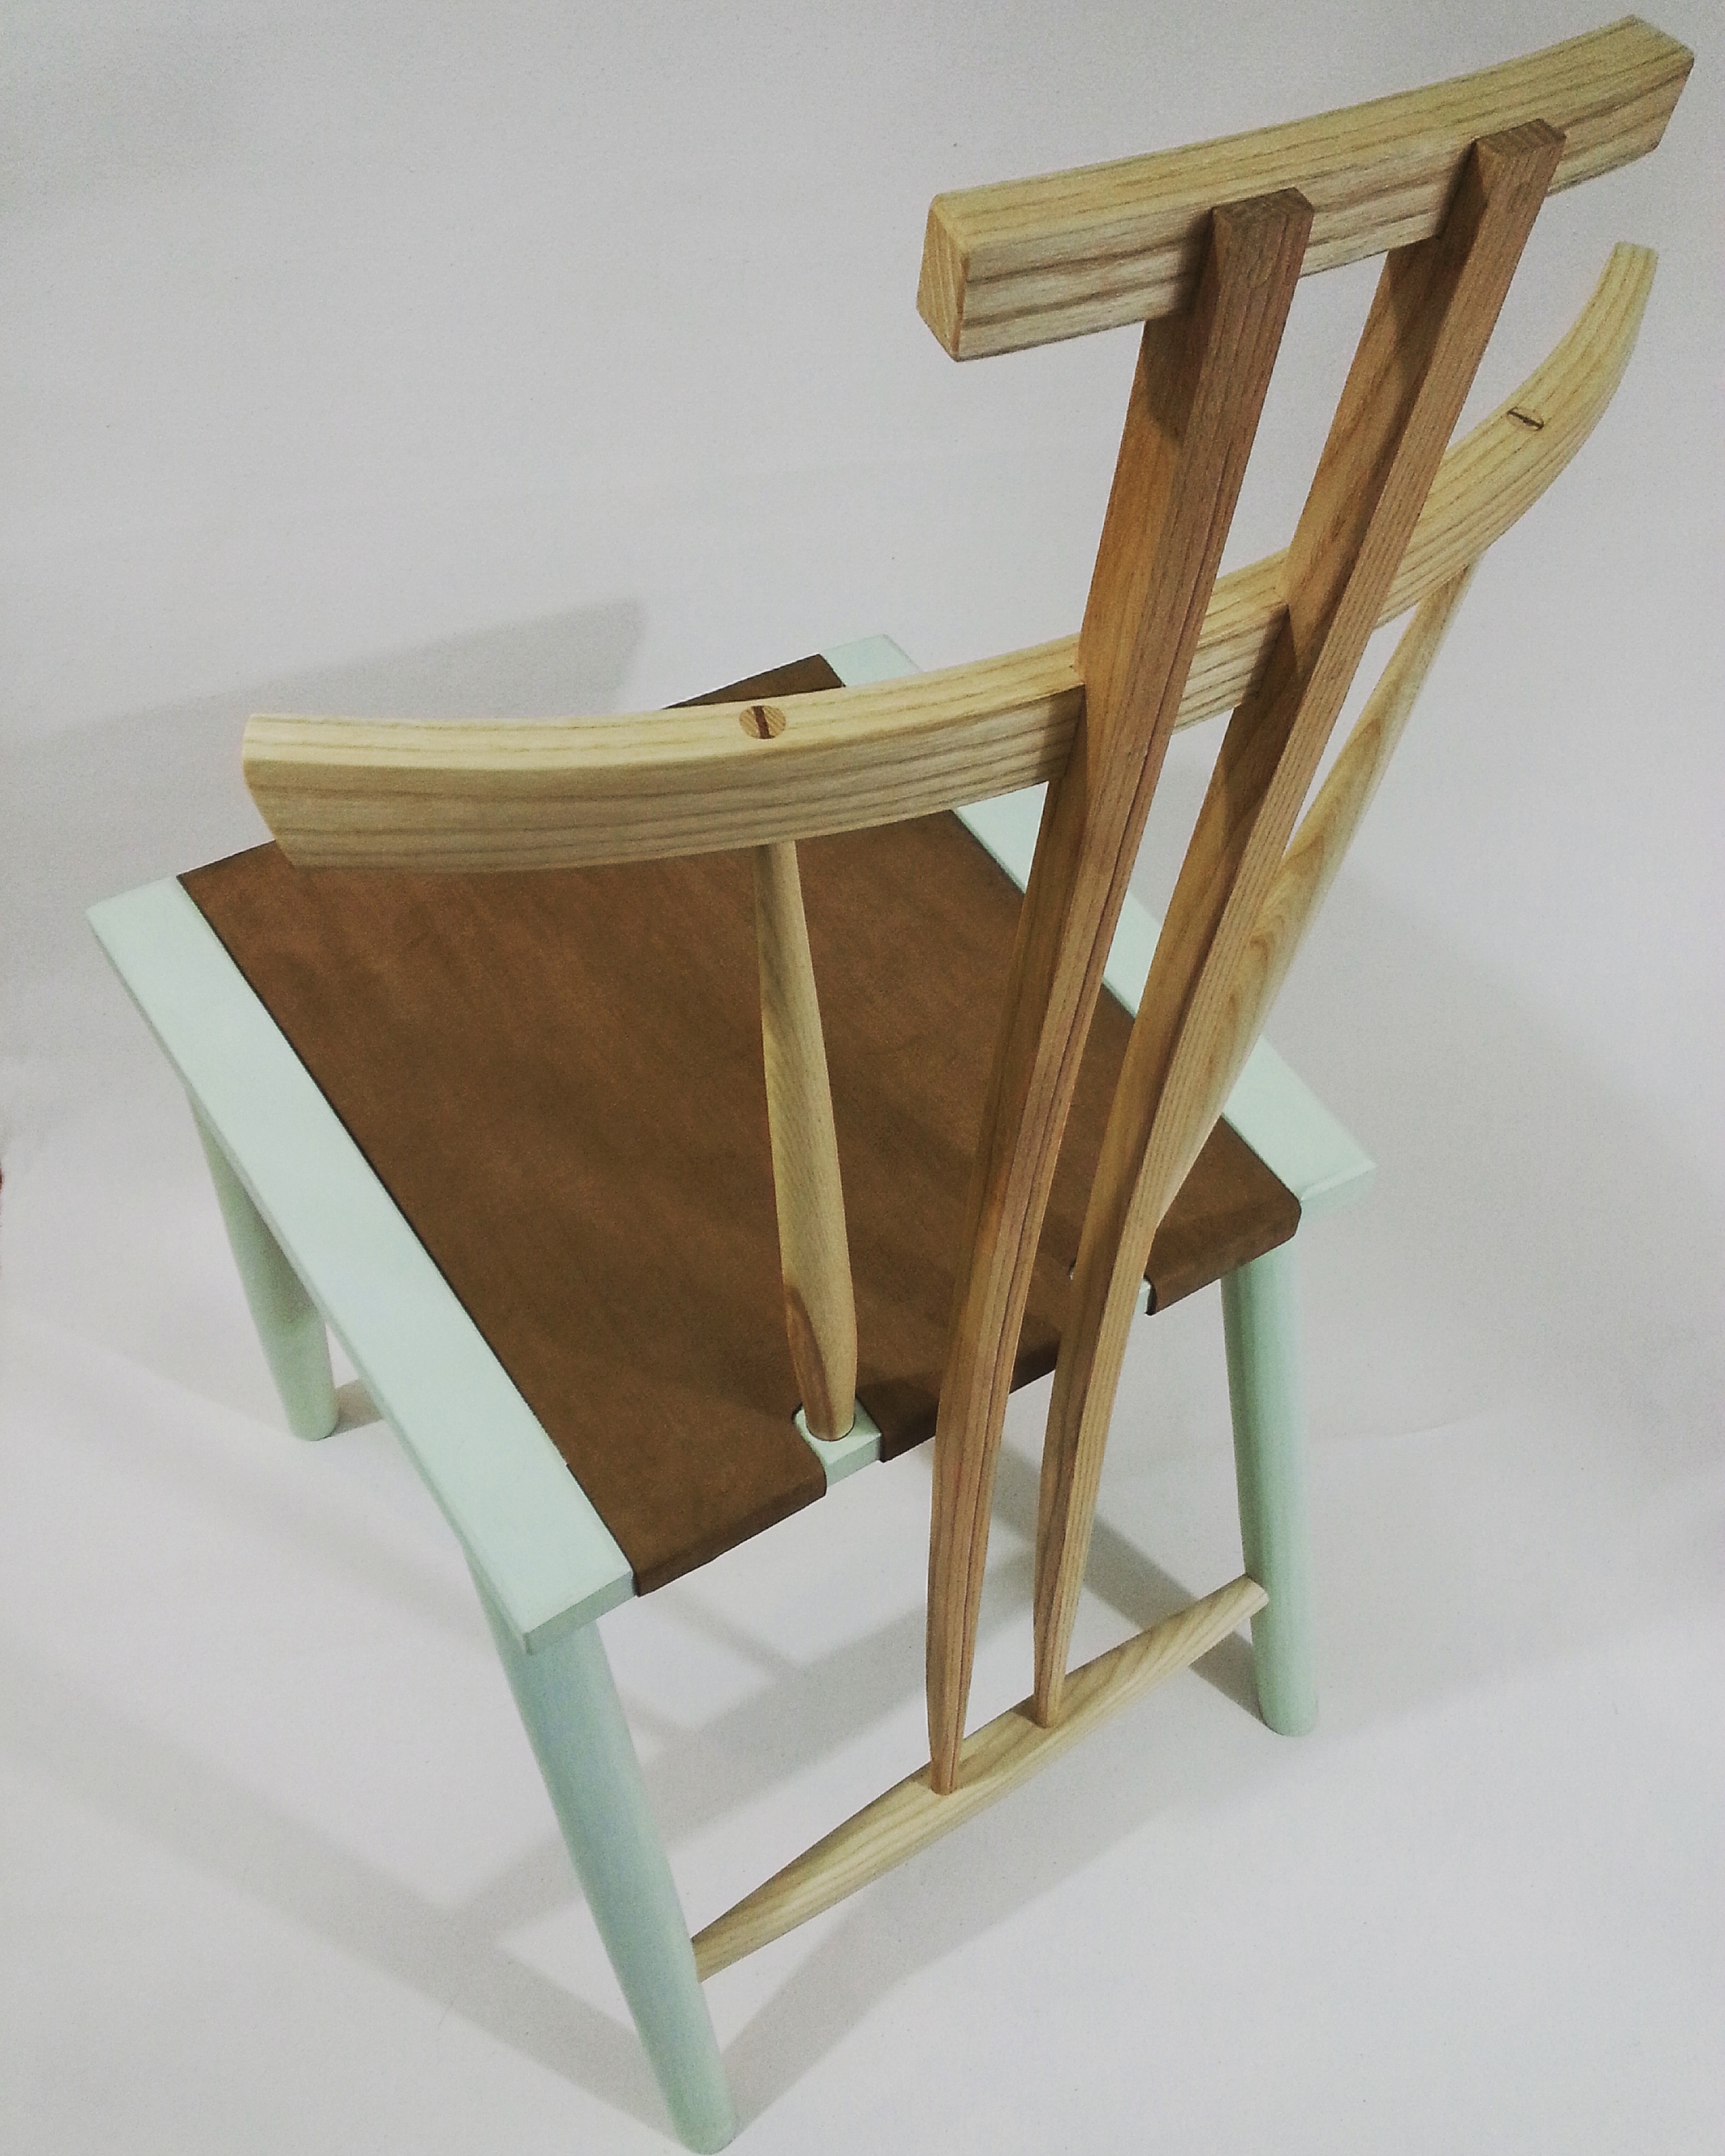 "The Ashby Chair"